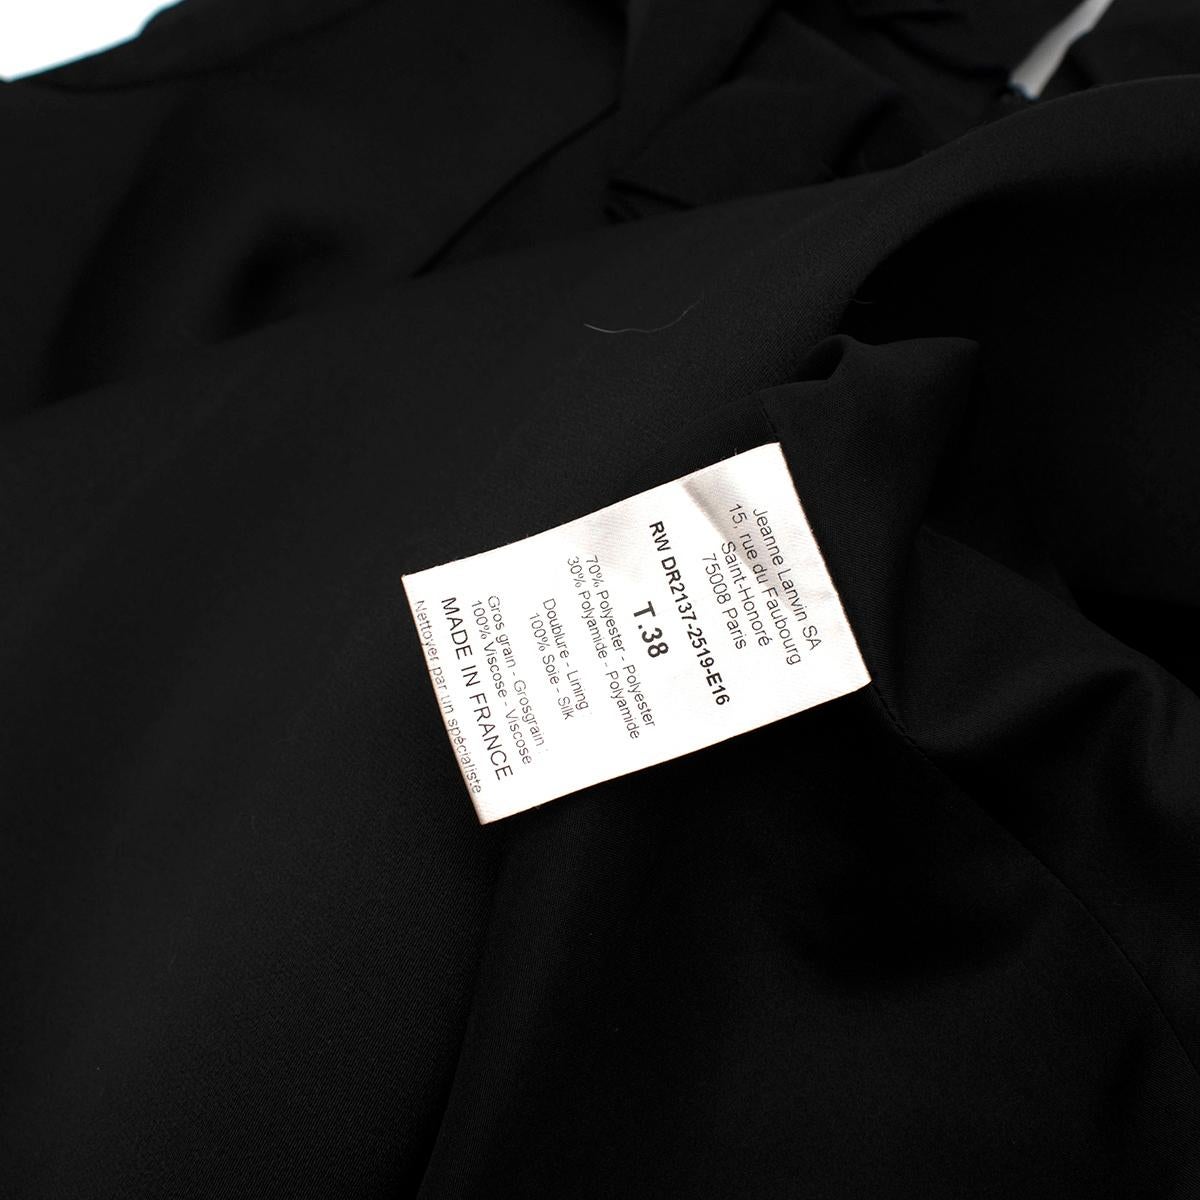 Lanvin Black Ruffled Cocktail Dress - US size 6 For Sale 1